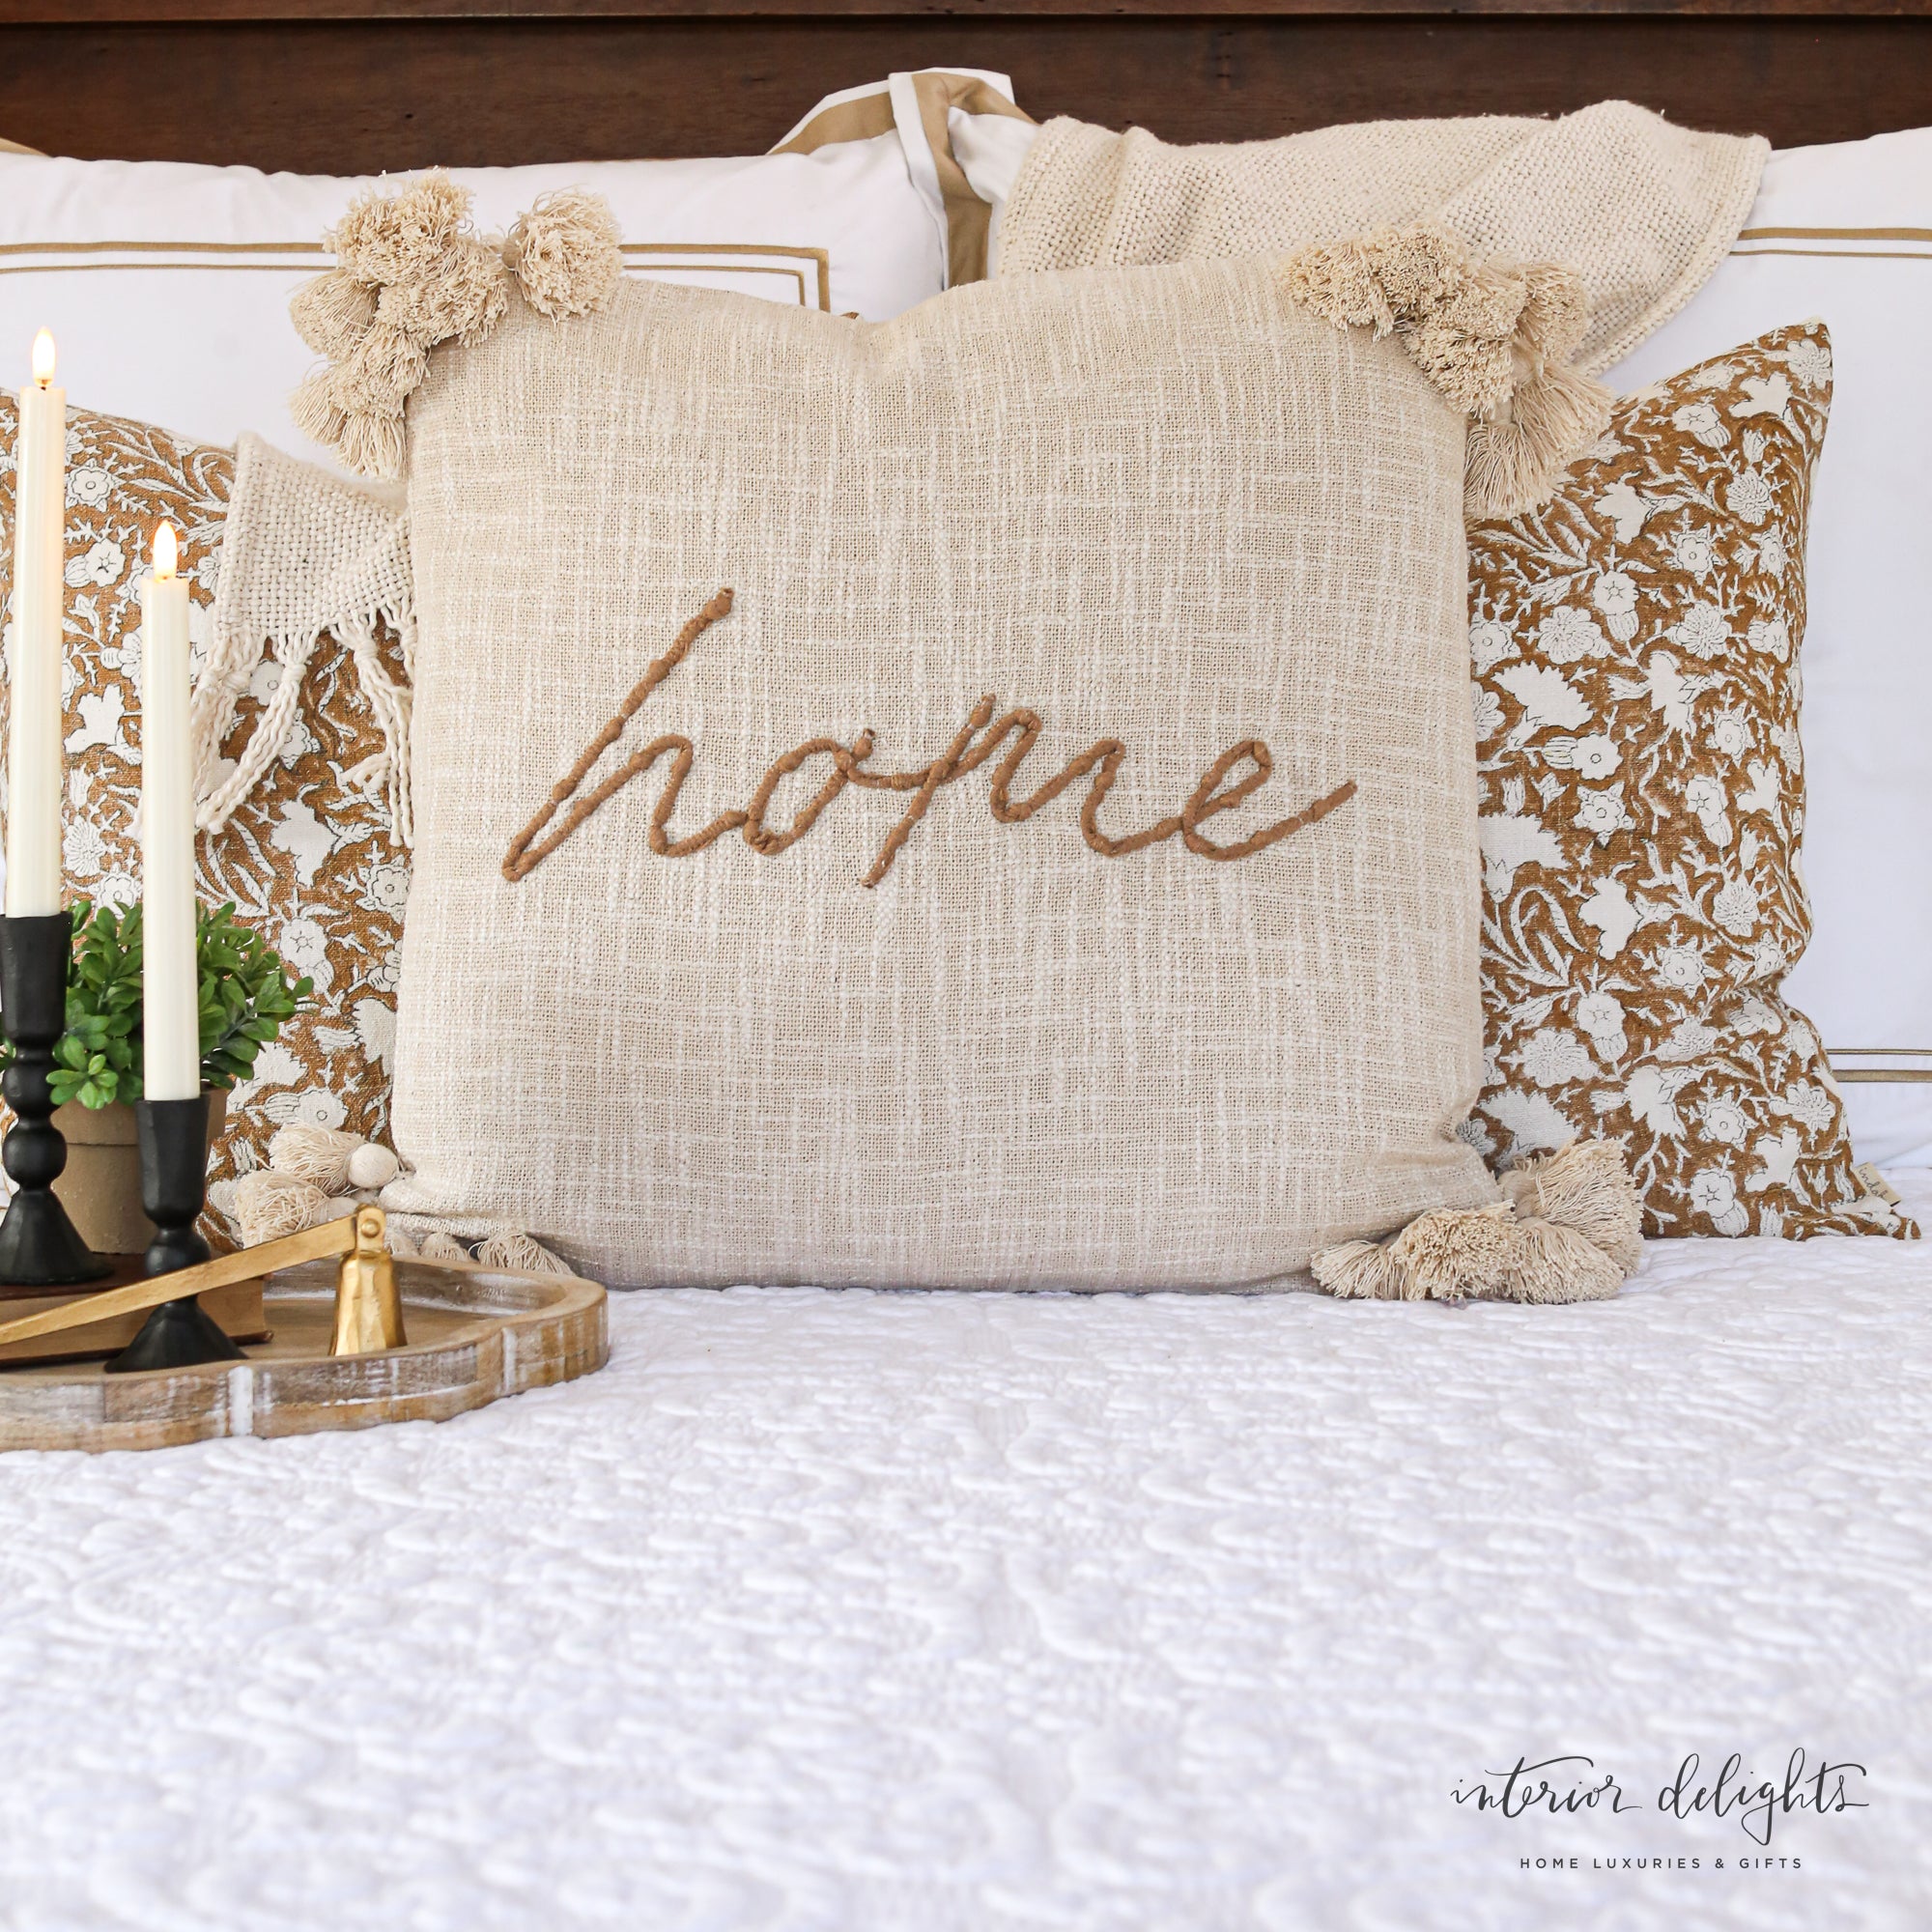 Embroidery Tassel Pillows- Hello or Home